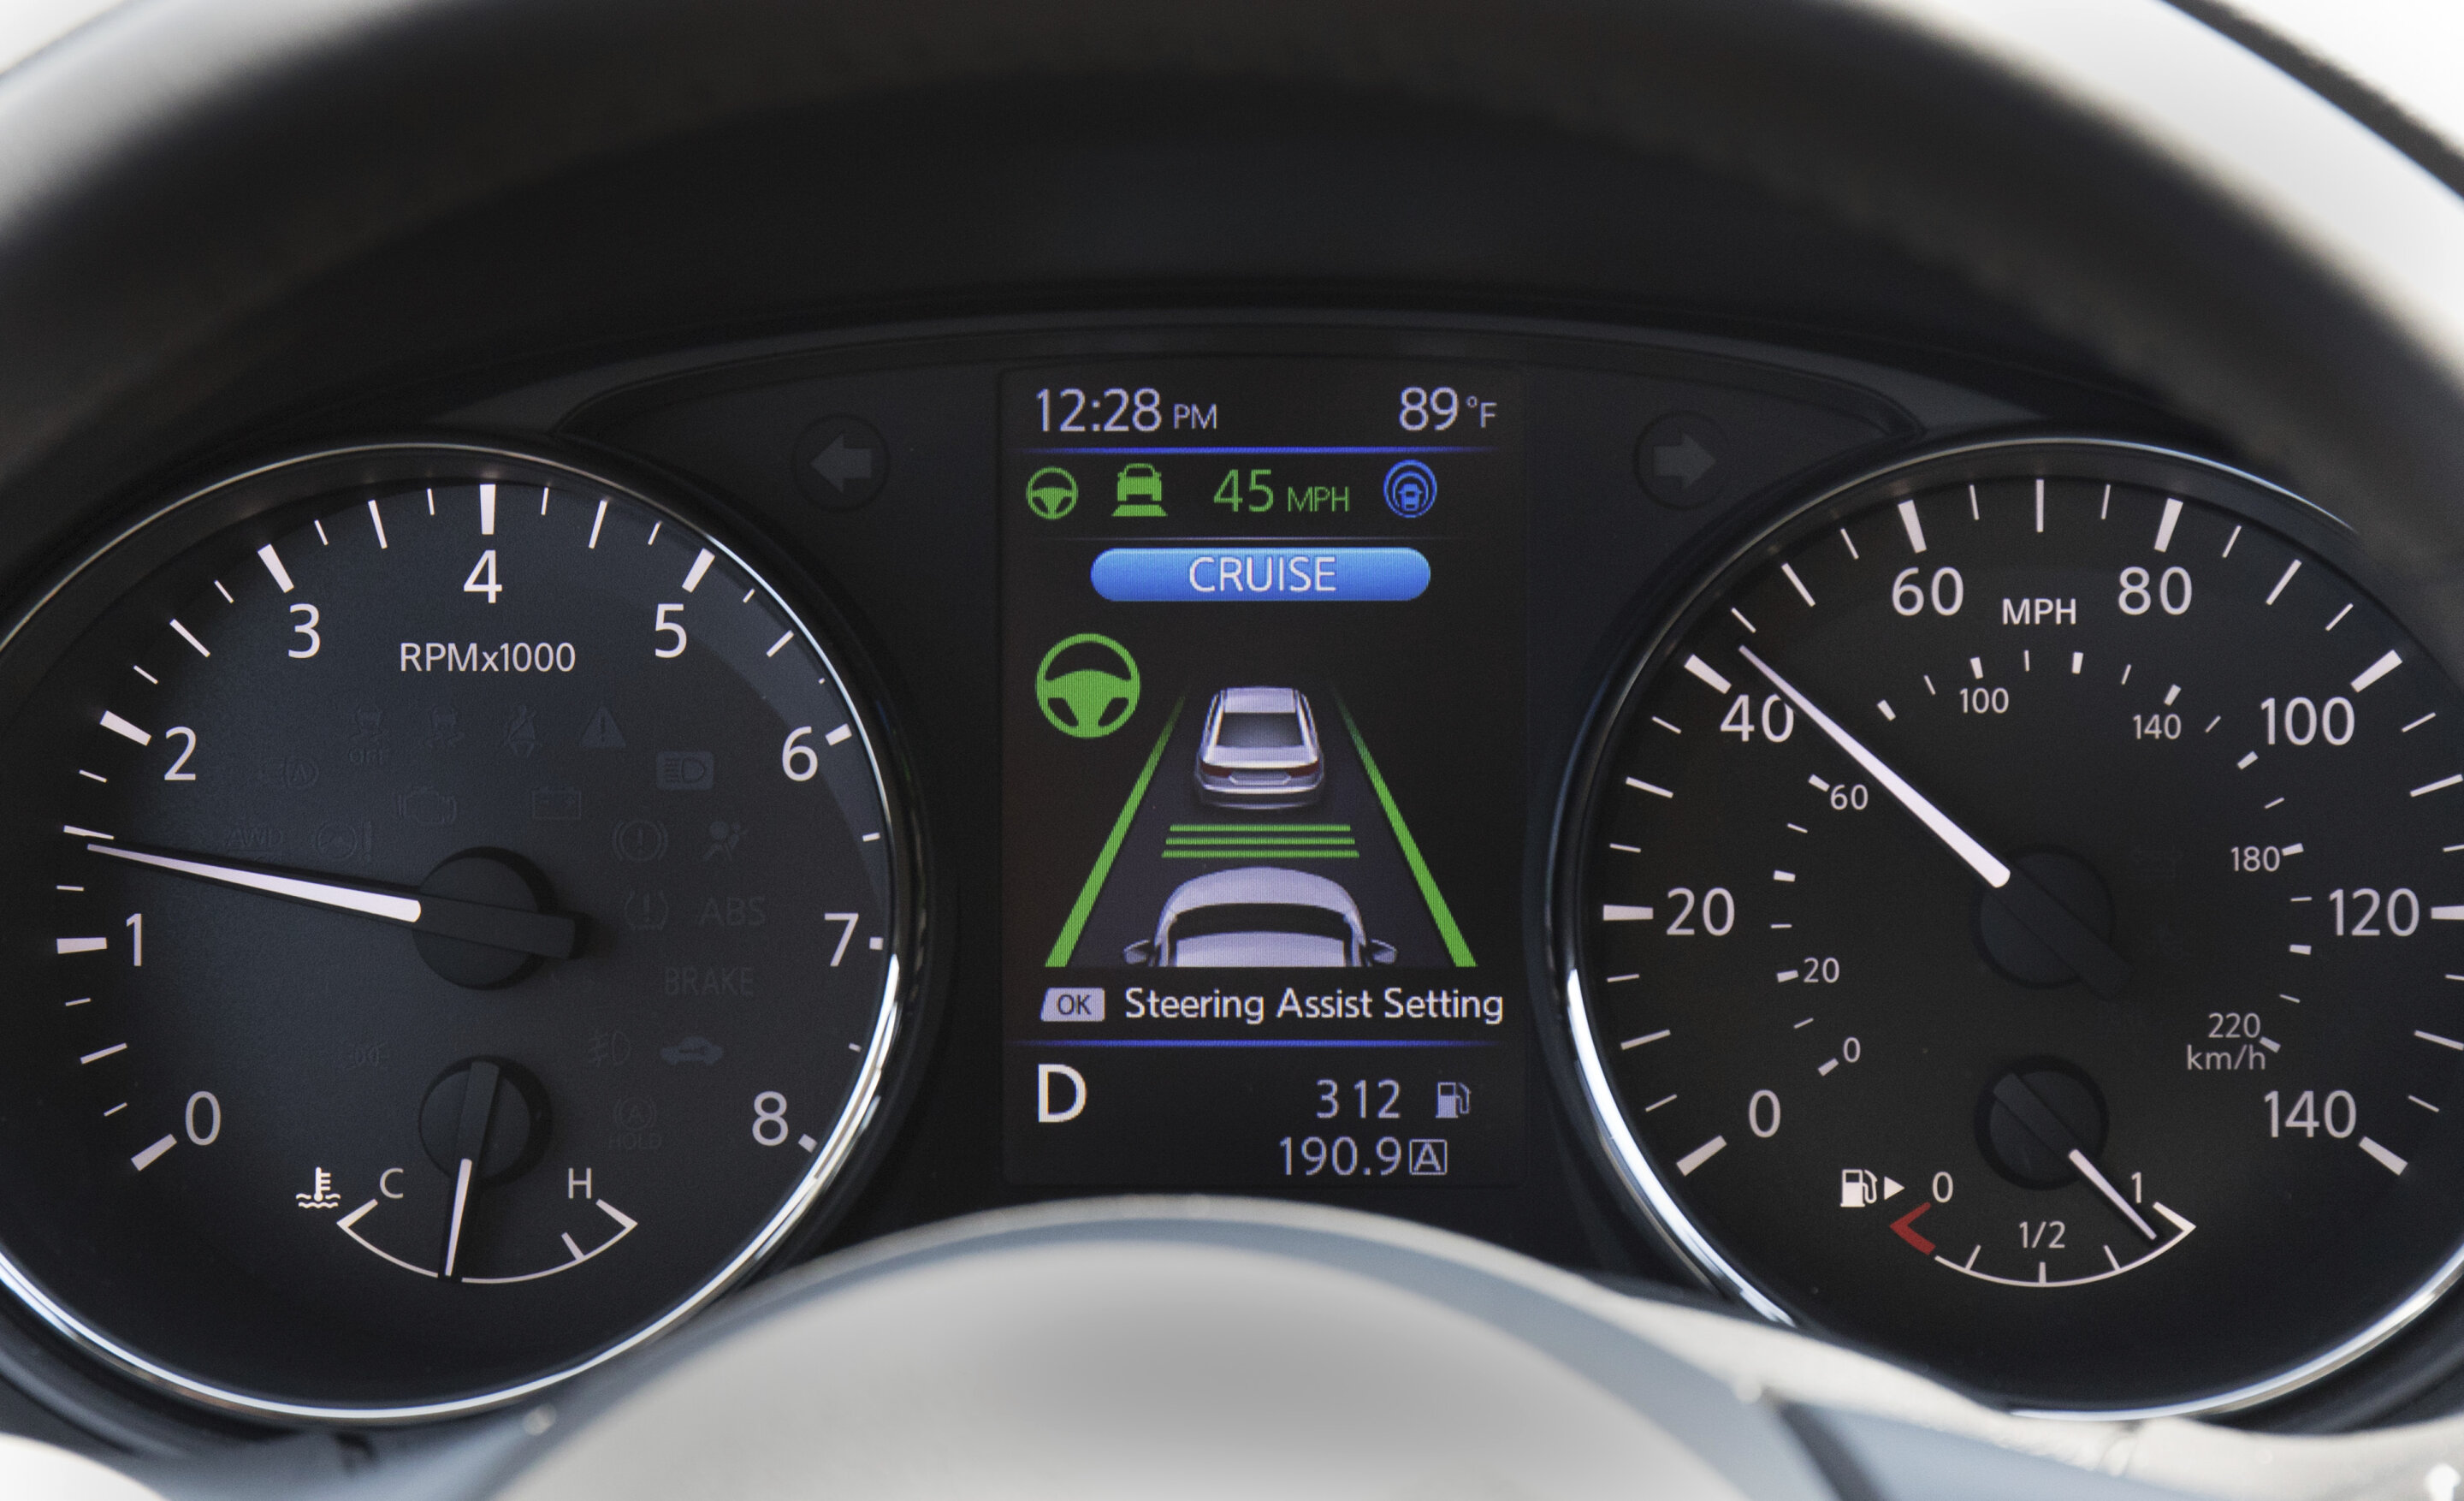 Demystifying advanced driver aids in new vehicles